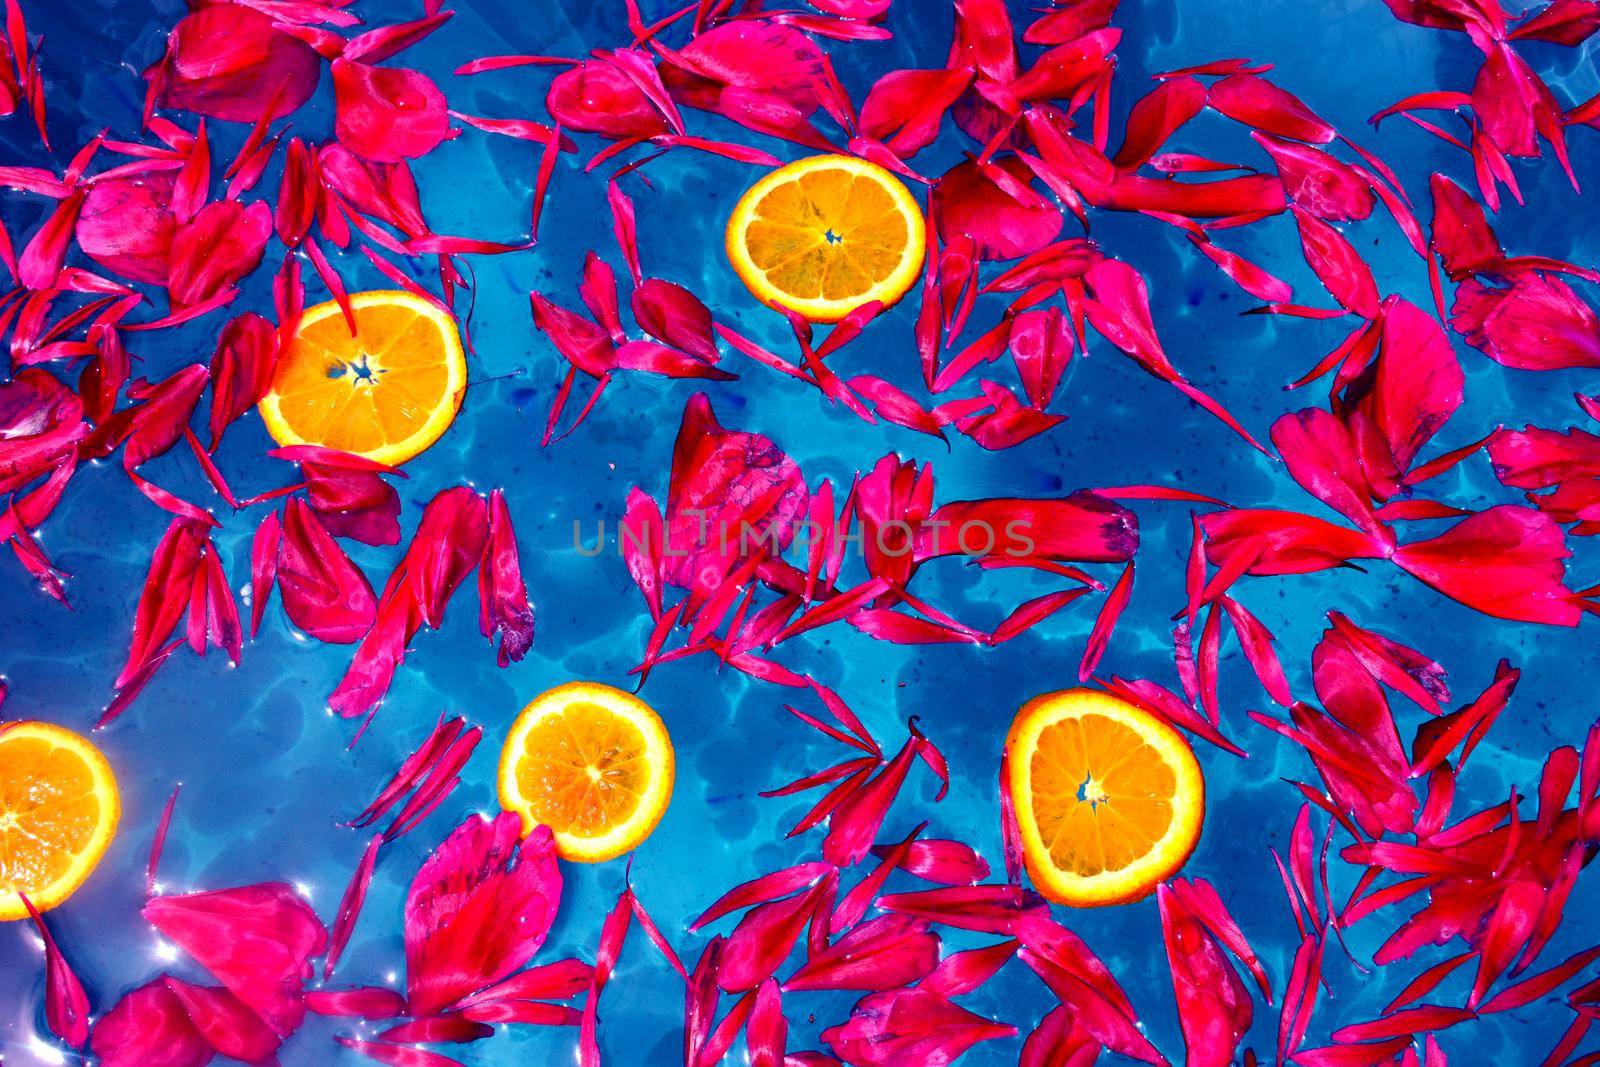 Red petals and orange slices floating on blue water